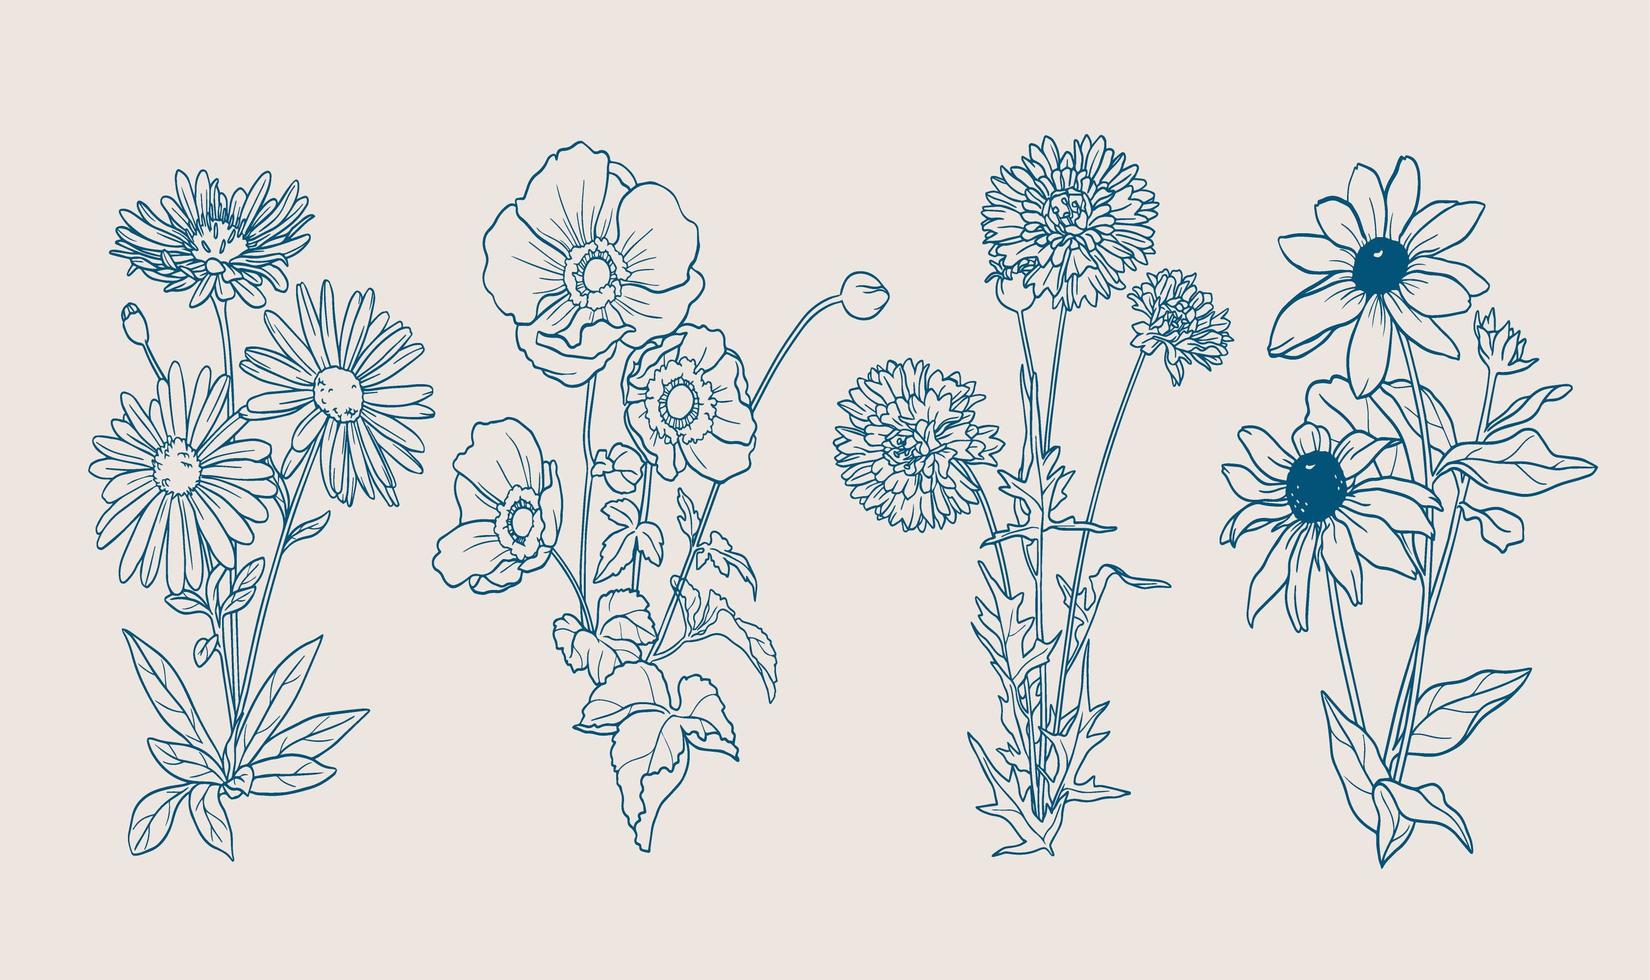 Autumn flowers with hand drawn outlines vector